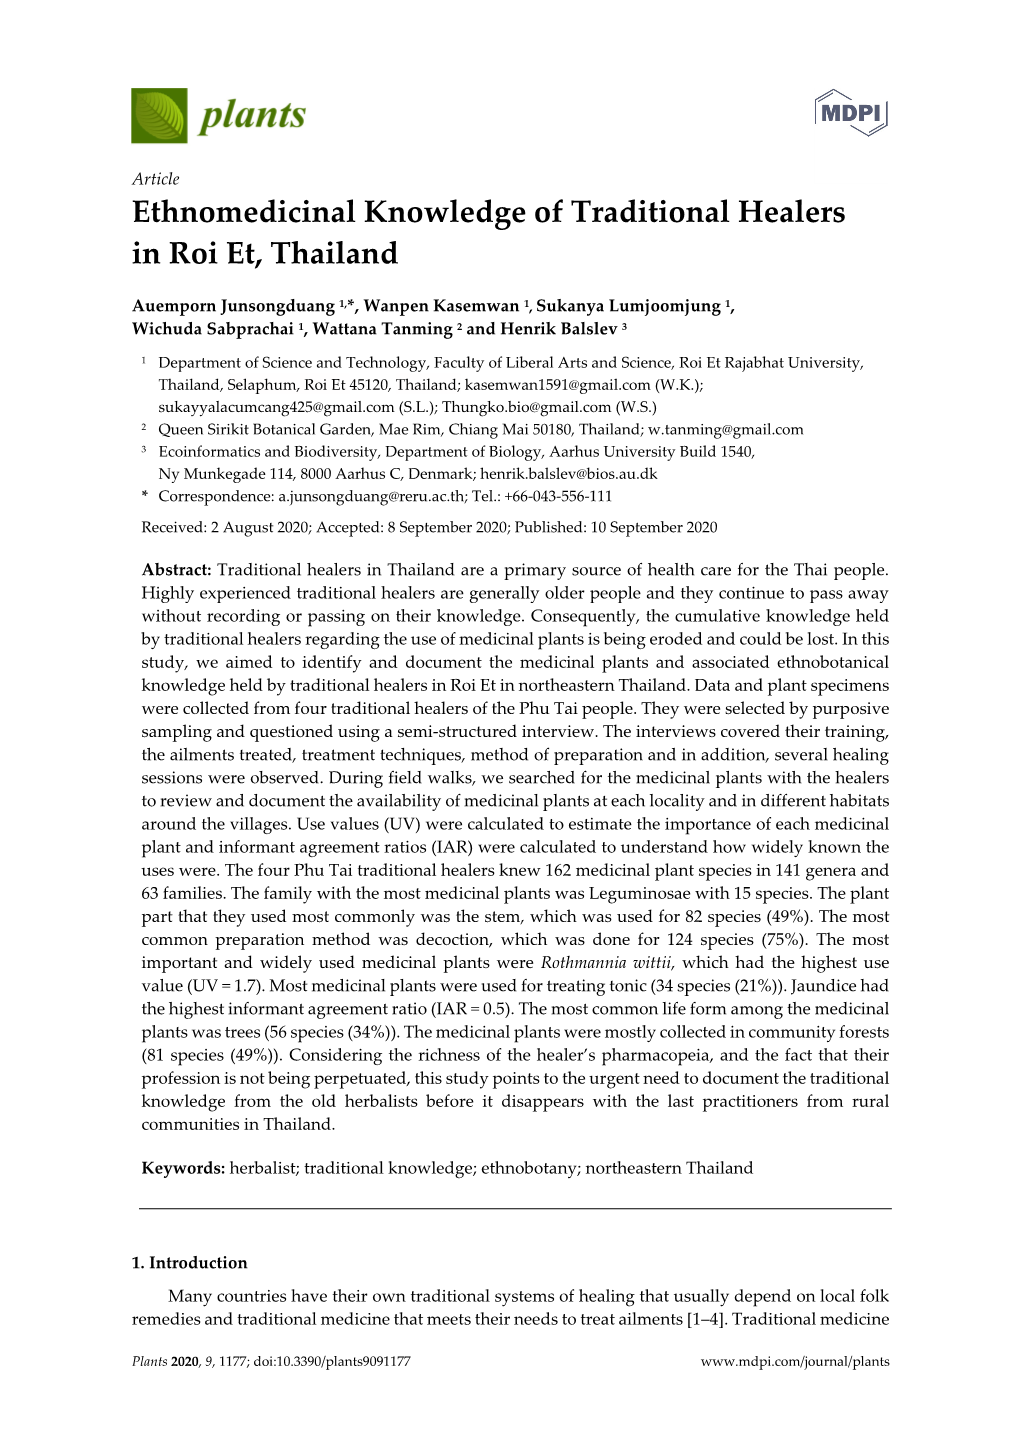 Ethnomedicinal Knowledge of Traditional Healers in Roi Et, Thailand